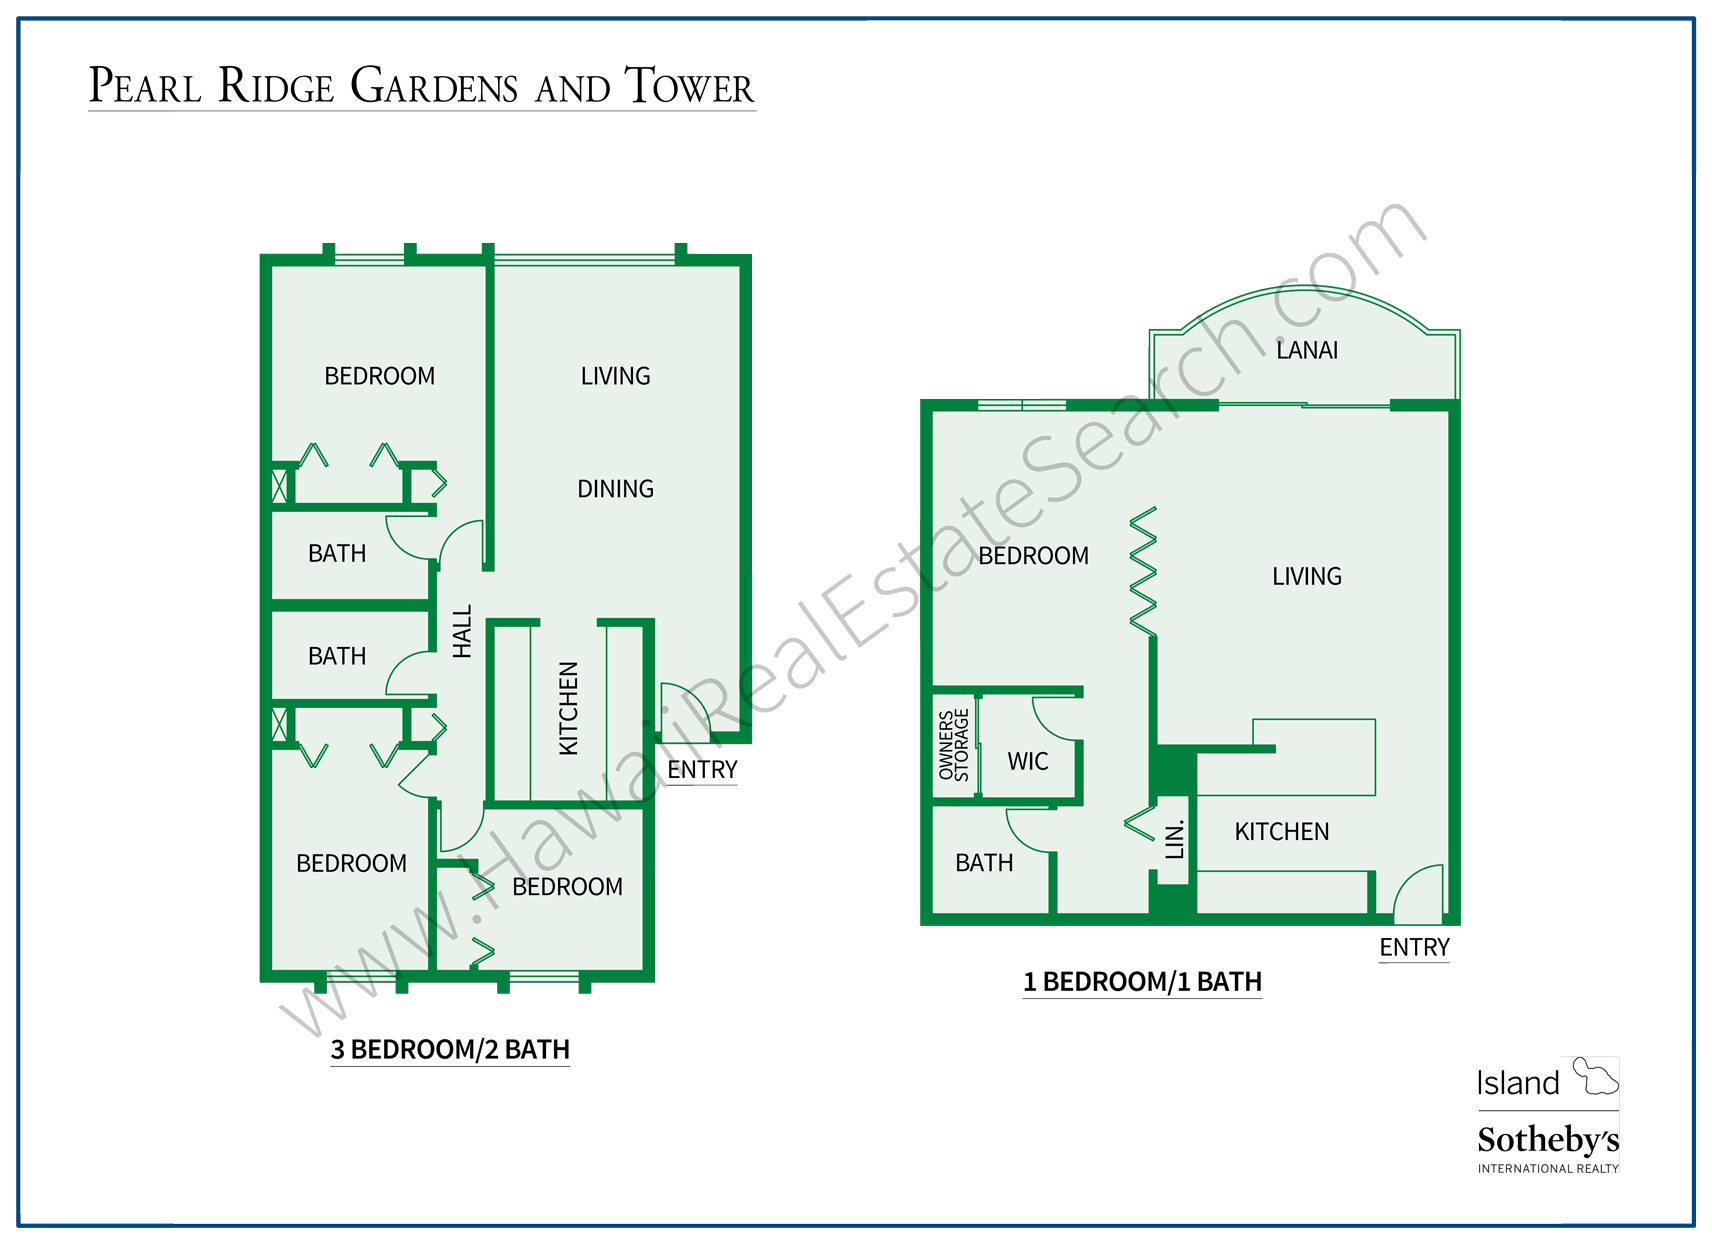 Pearl Ridge Gardens and Tower Floor Plans